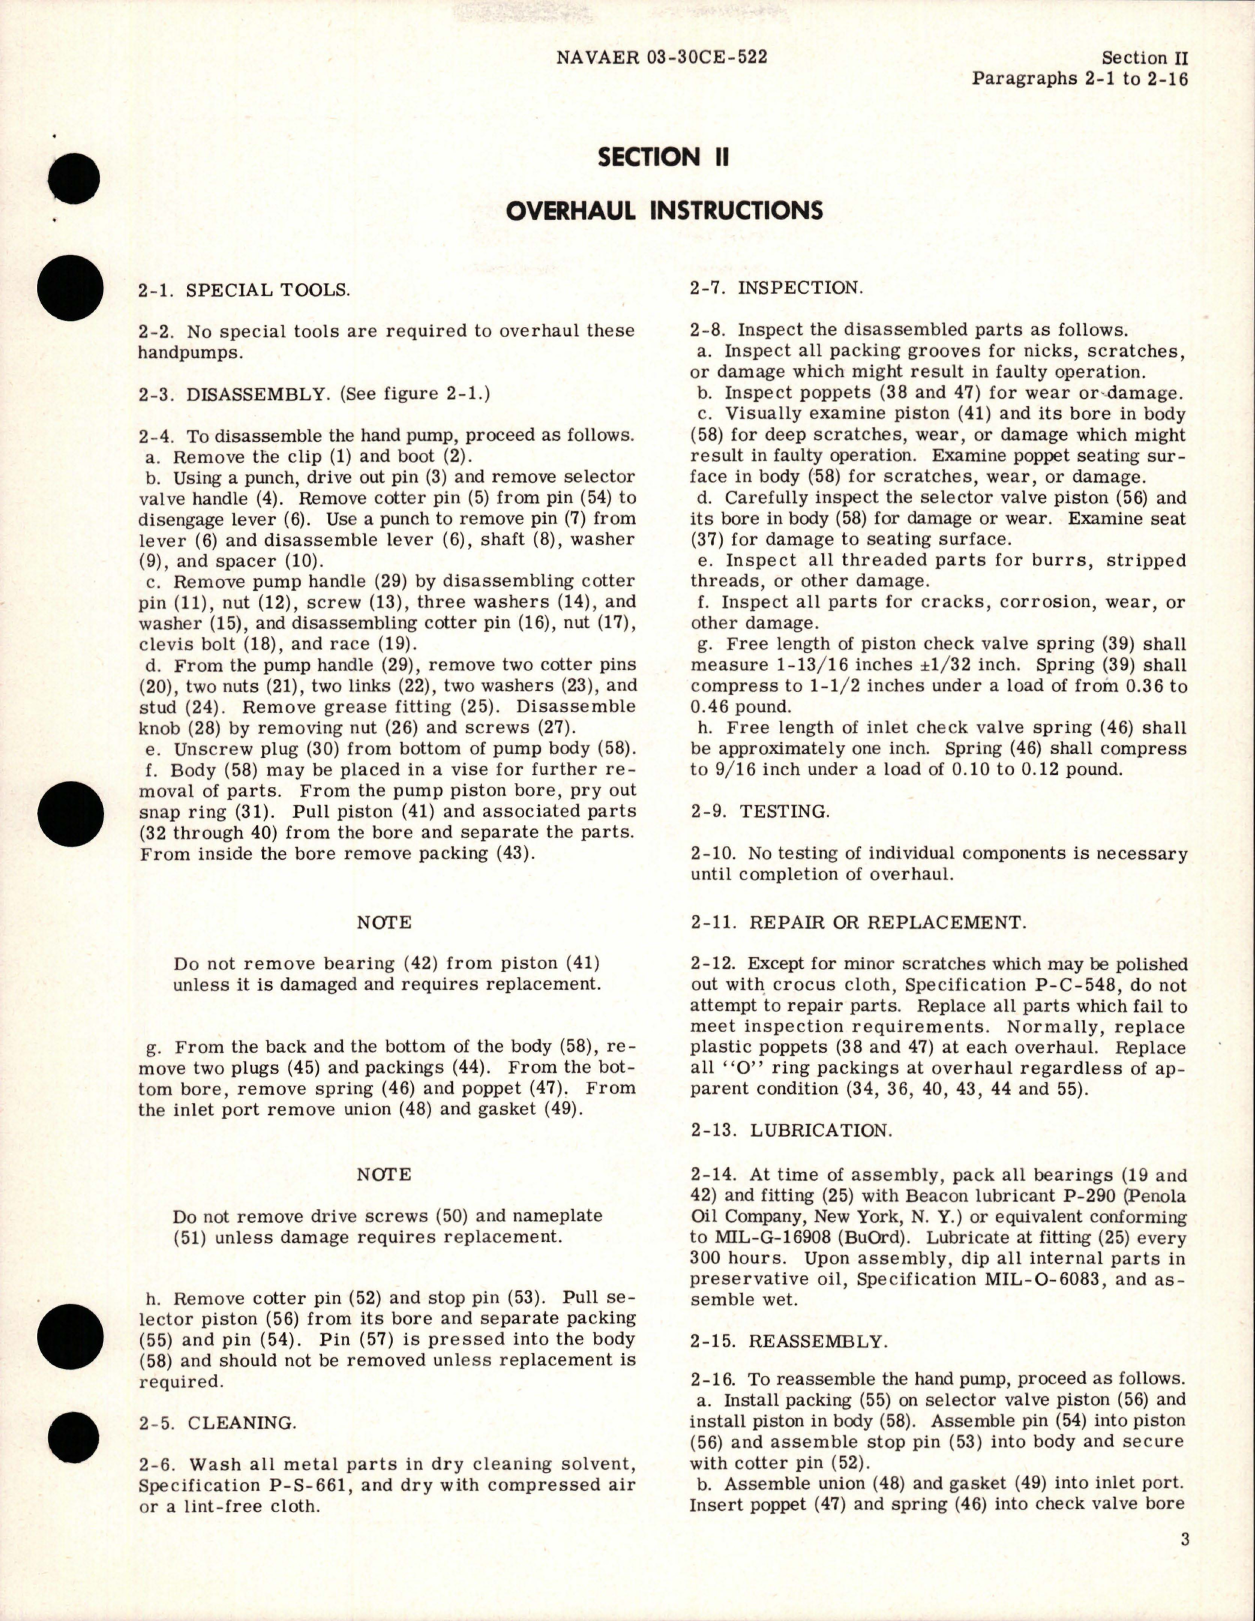 Sample page 5 from AirCorps Library document: Overhaul Instructions for Hydraulic Hand Pumps - Integral Selector Valve Type 